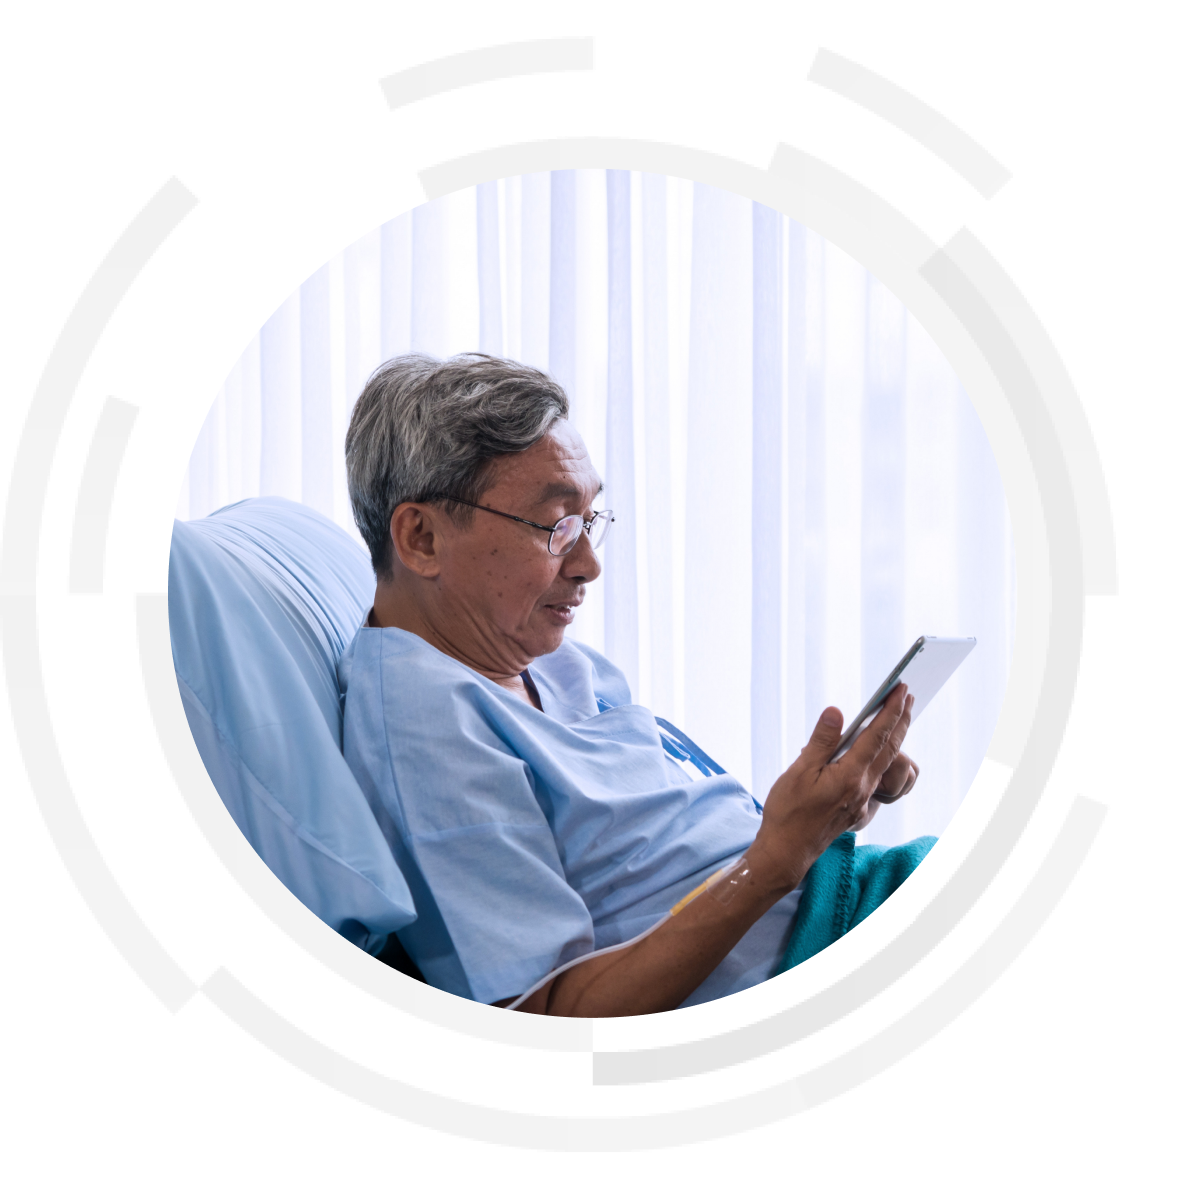 Male patient sitting up in a hospital bed video calling using a tablet device.